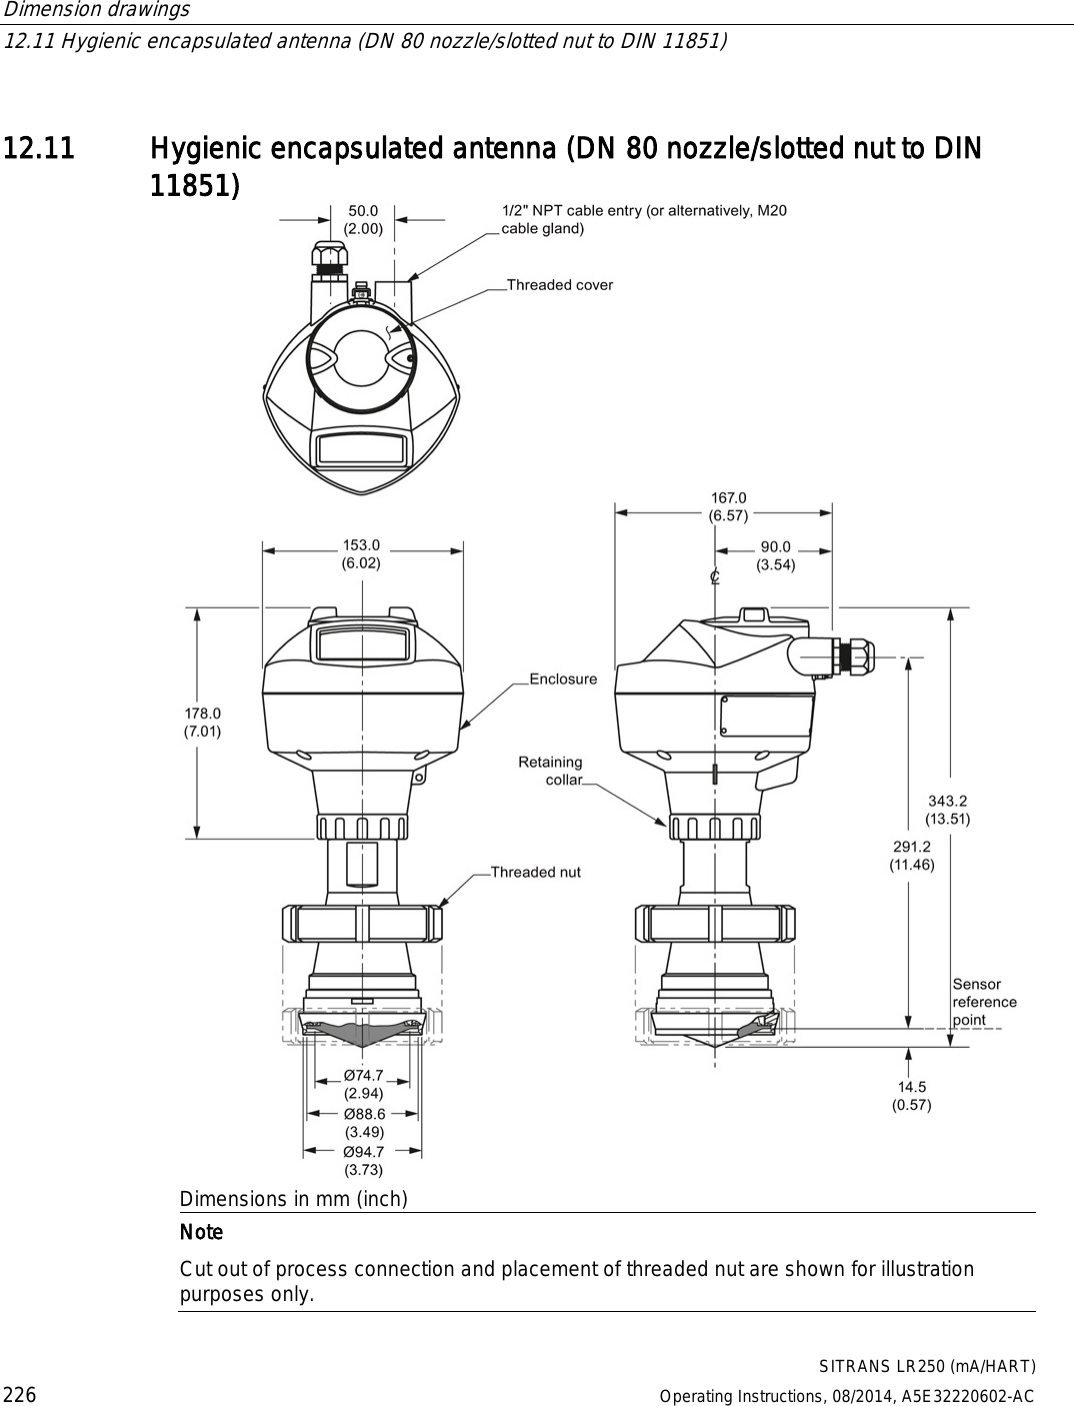 Dimension drawings   12.11 Hygienic encapsulated antenna (DN 80 nozzle/slotted nut to DIN 11851)  SITRANS LR250 (mA/HART) 226 Operating Instructions, 08/2014, A5E32220602-AC  12.11 Hygienic encapsulated antenna (DN 80 nozzle/slotted nut to DIN 11851)  Dimensions in mm (inch)  Note Cut out of process connection and placement of threaded nut are shown for illustration purposes only. 